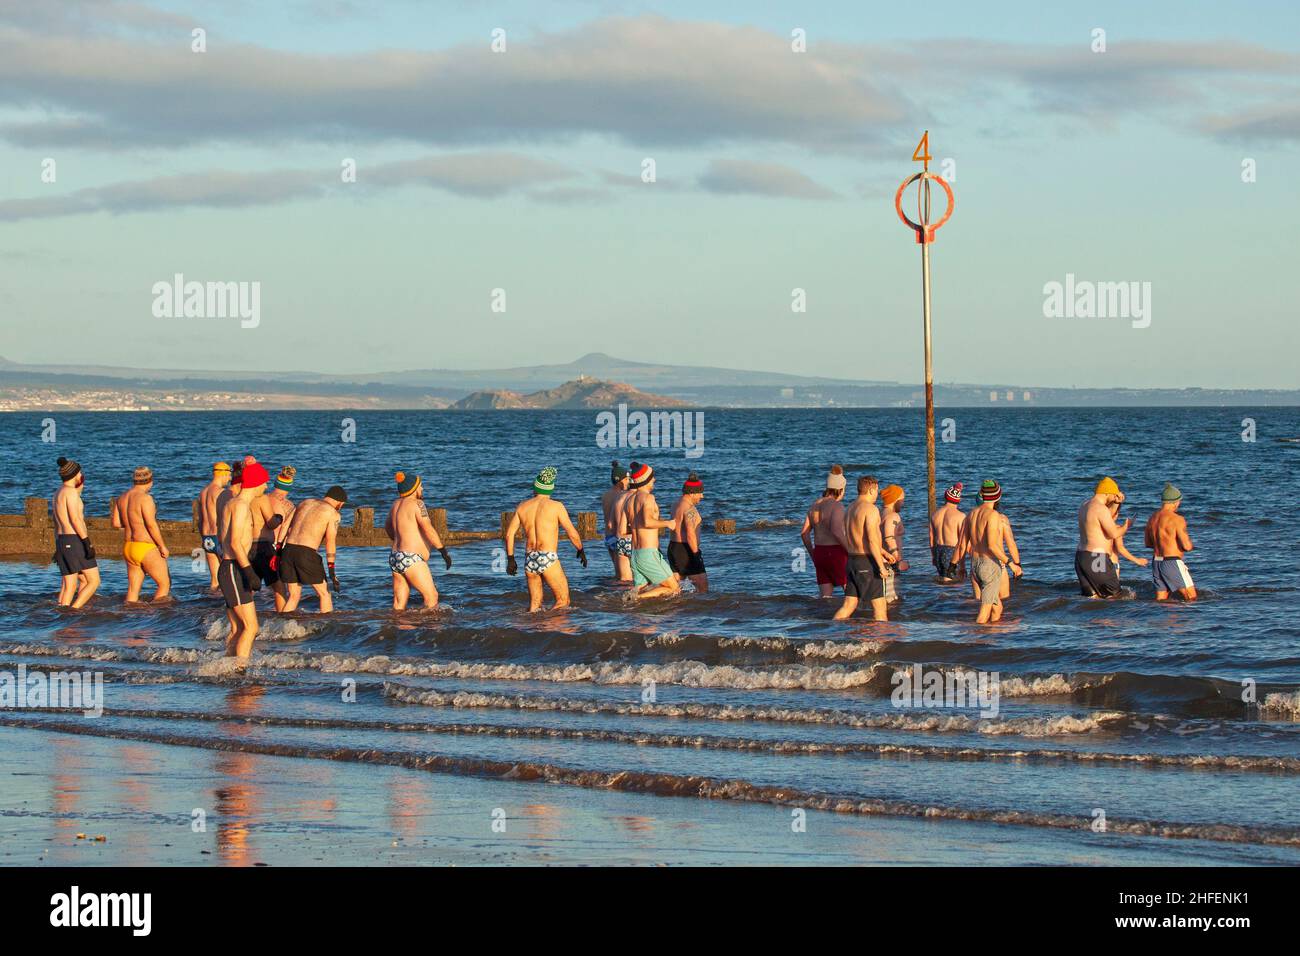 Portobello, Edinburgh, Scotland, UK. 16th January 2022. Finally sunrise sunshine with temperature of 7 degrees after a week of heavy cloud in the skies above the city. Pictured: Edinburgh Blueballs group get together at the seaside for a chilly dip in the Firth of Forth. Credit: Scottishcreative/Alamy Live News. Stock Photo